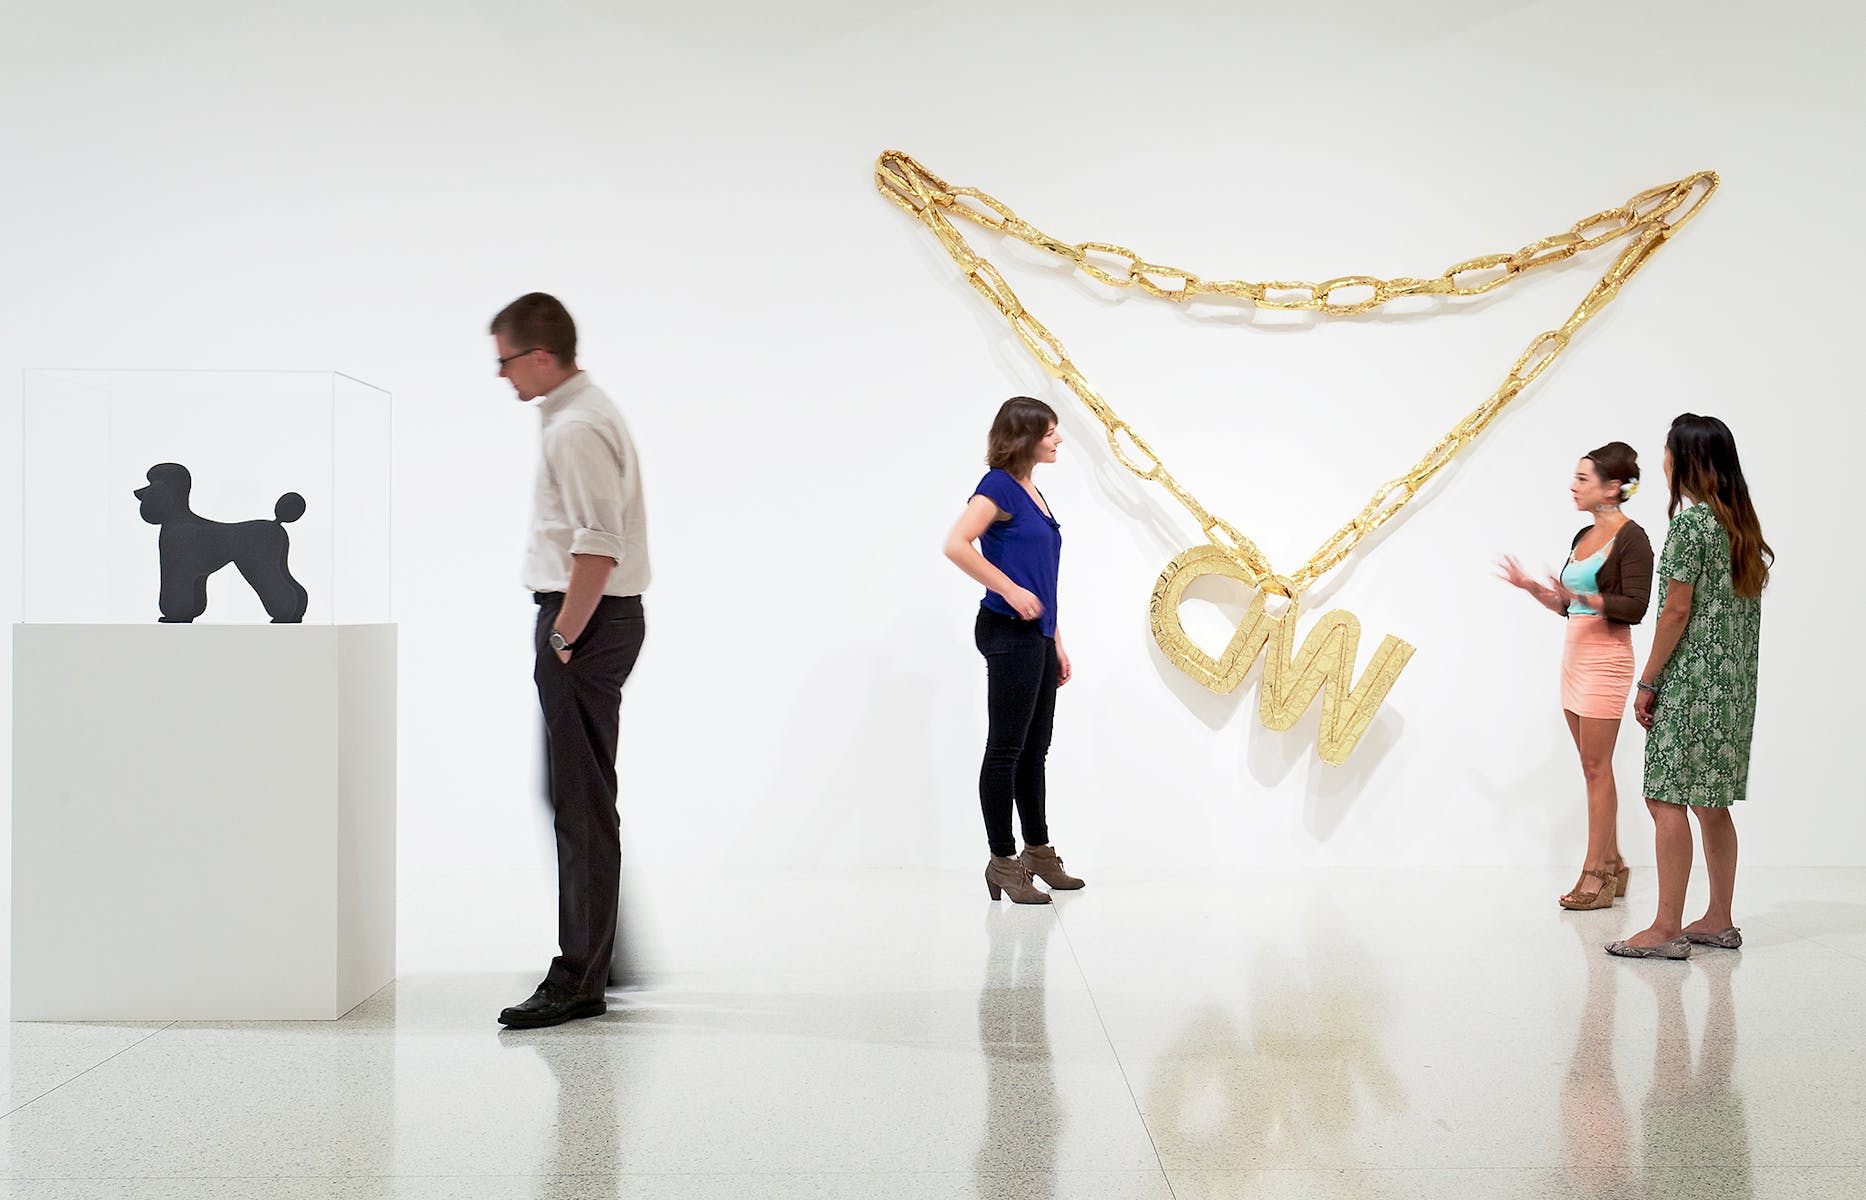 Installation view of the exhibition The Living Years, 2012